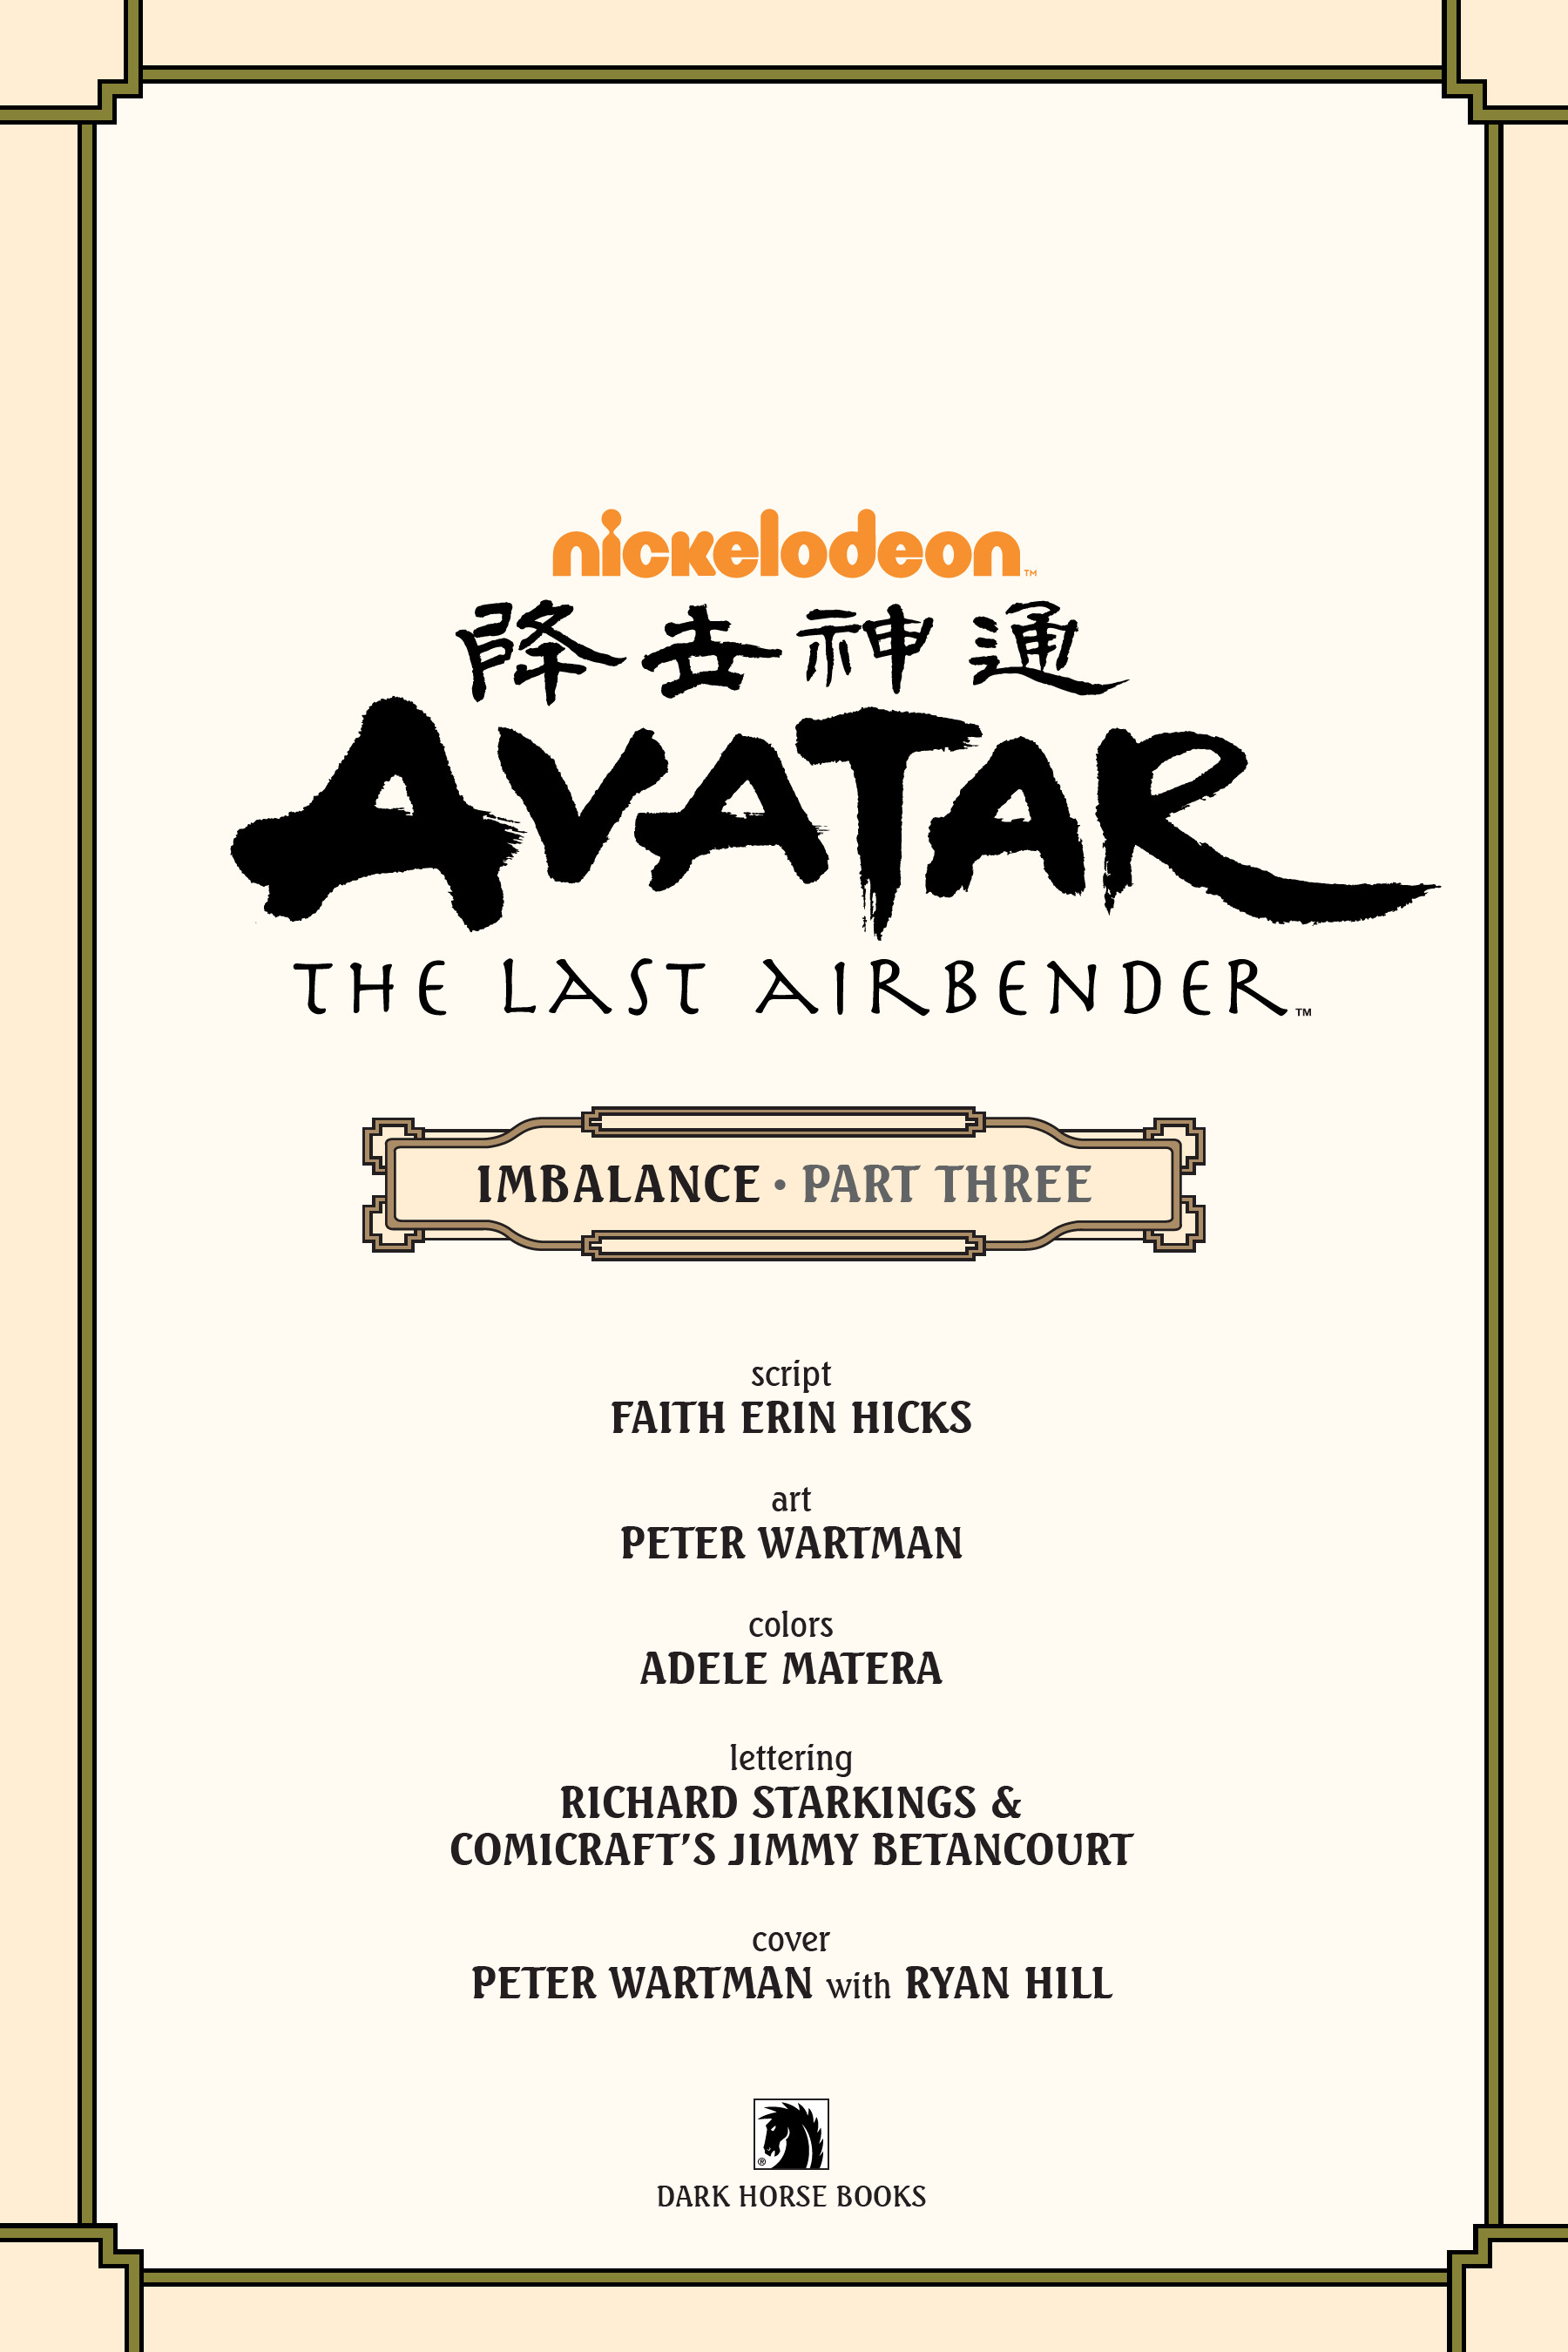 Read online Nickelodeon Avatar: The Last Airbender - Imbalance comic -  Issue # TPB 3 - 4